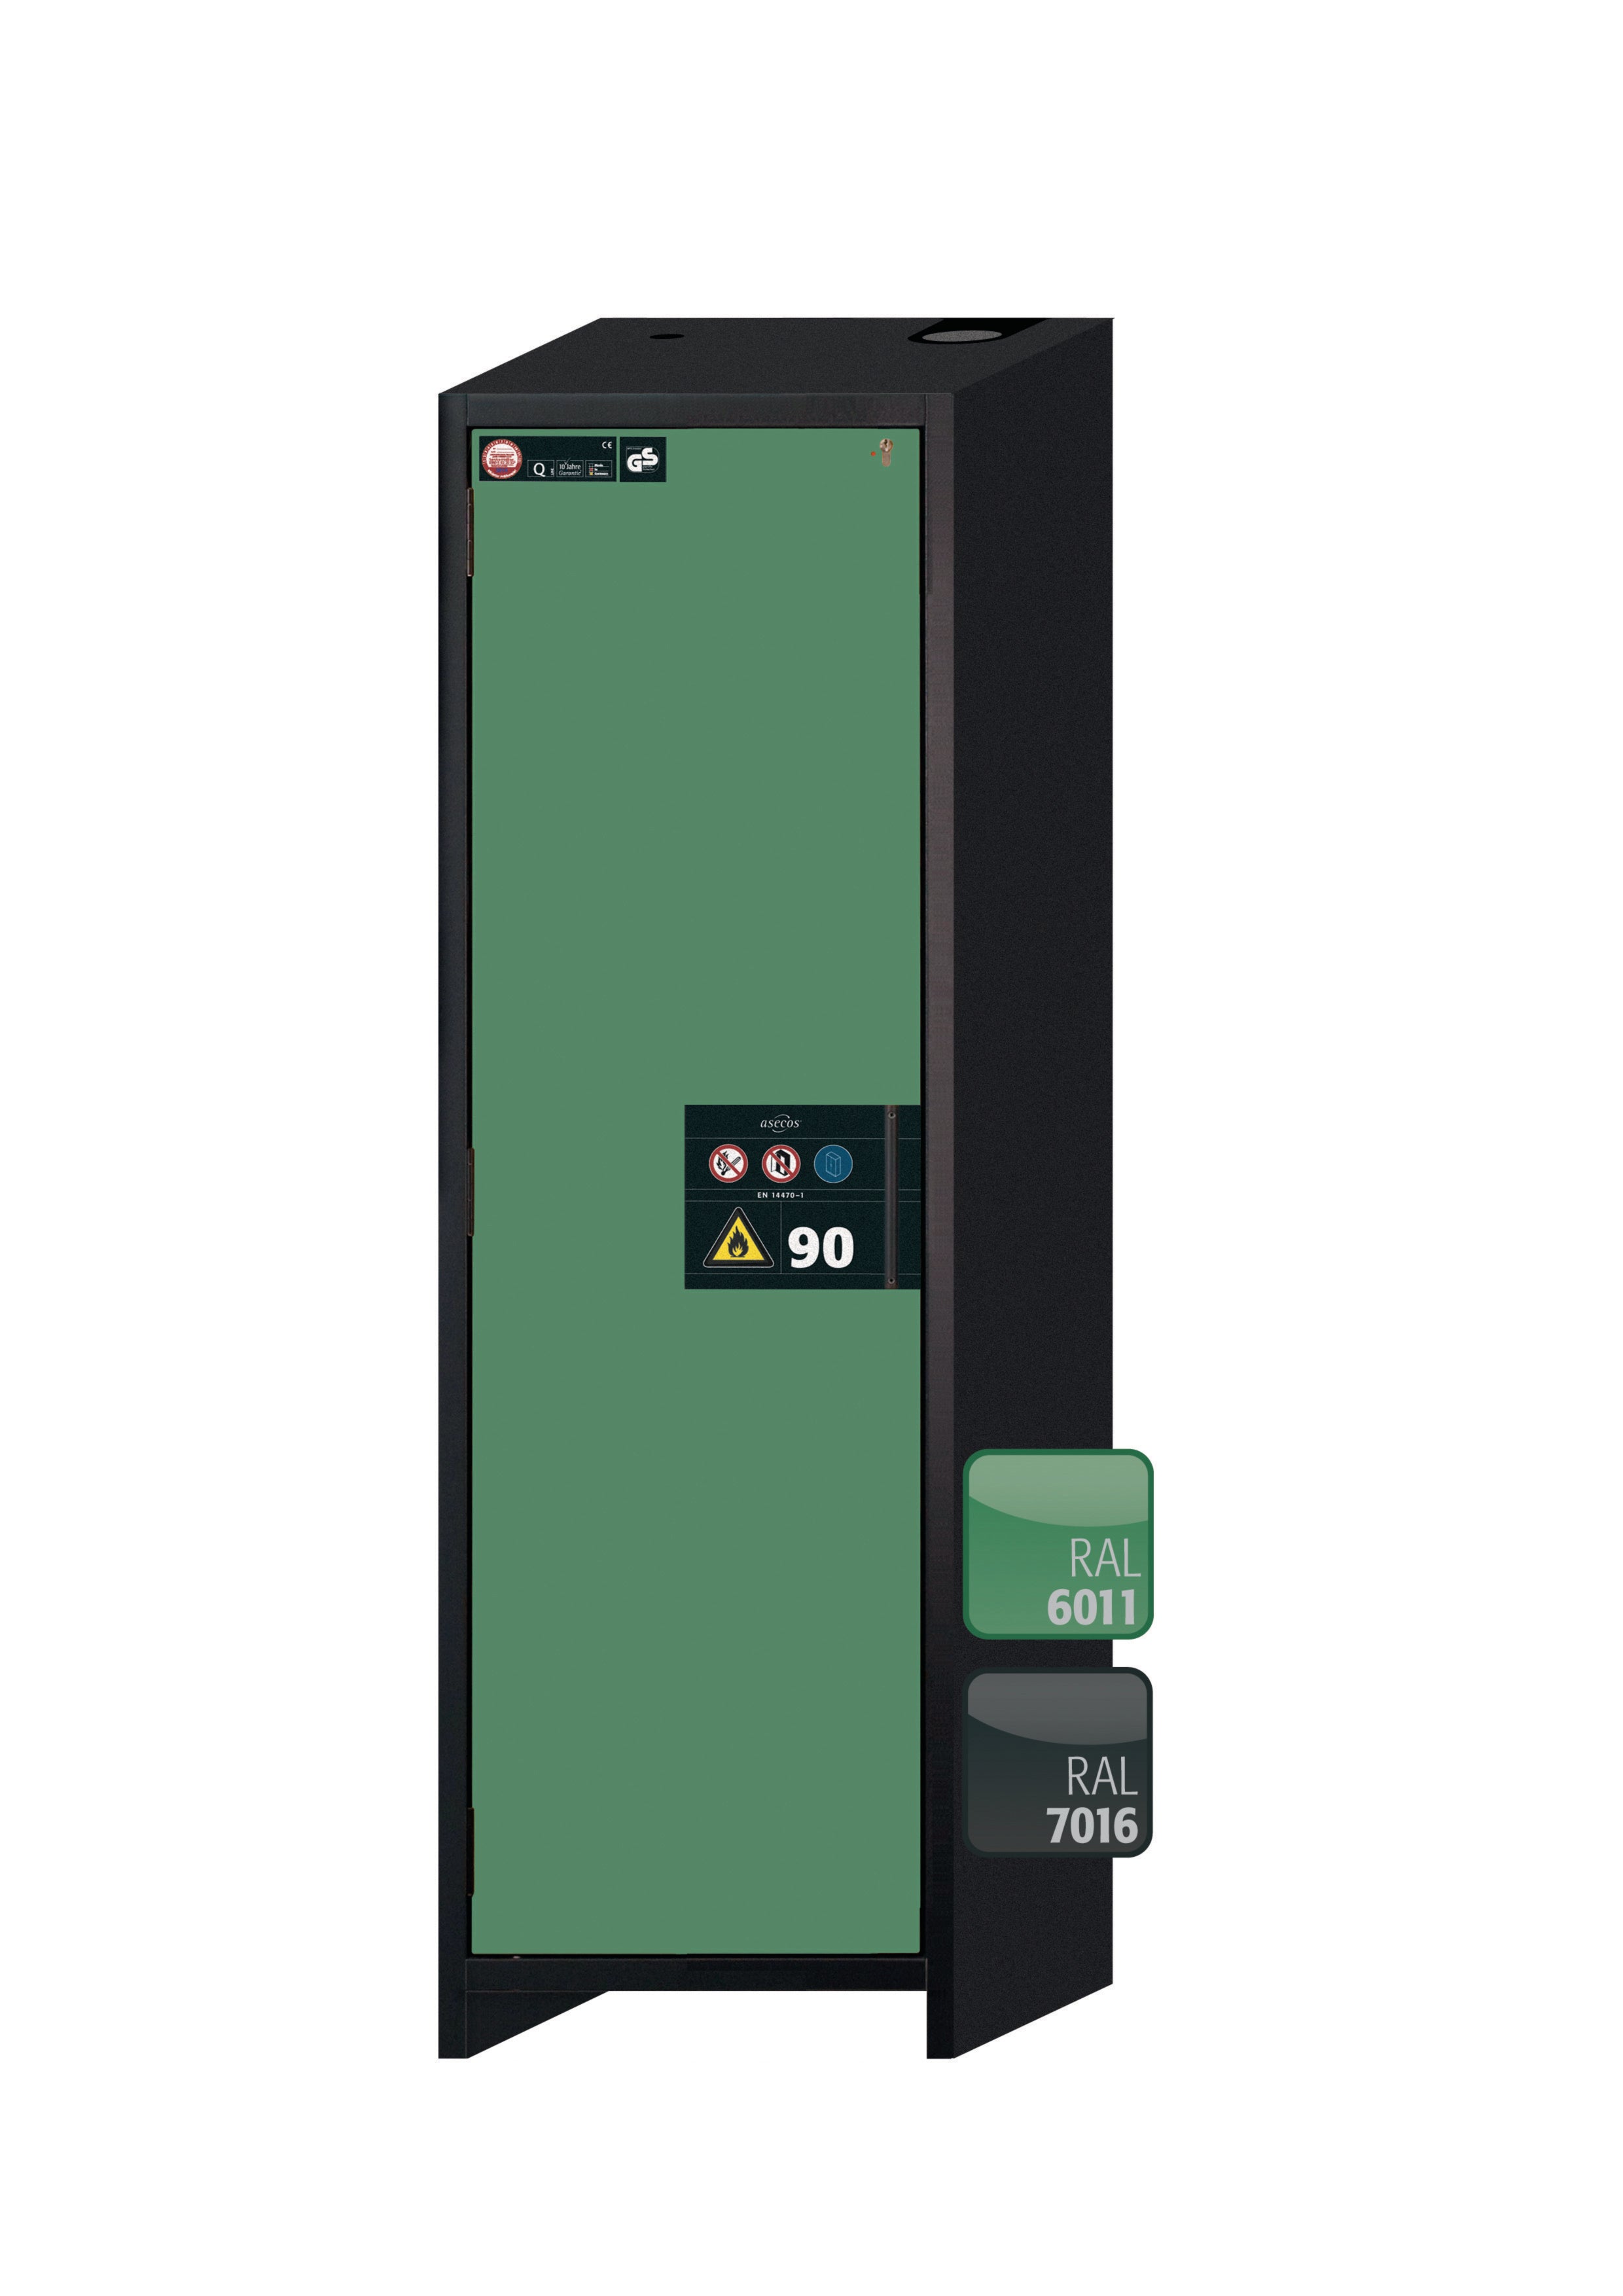 Type 90 safety storage cabinet Q-CLASSIC-90 model Q90.195.060 in reseda green RAL 6011 with 2x shelf standard (stainless steel 1.4301),